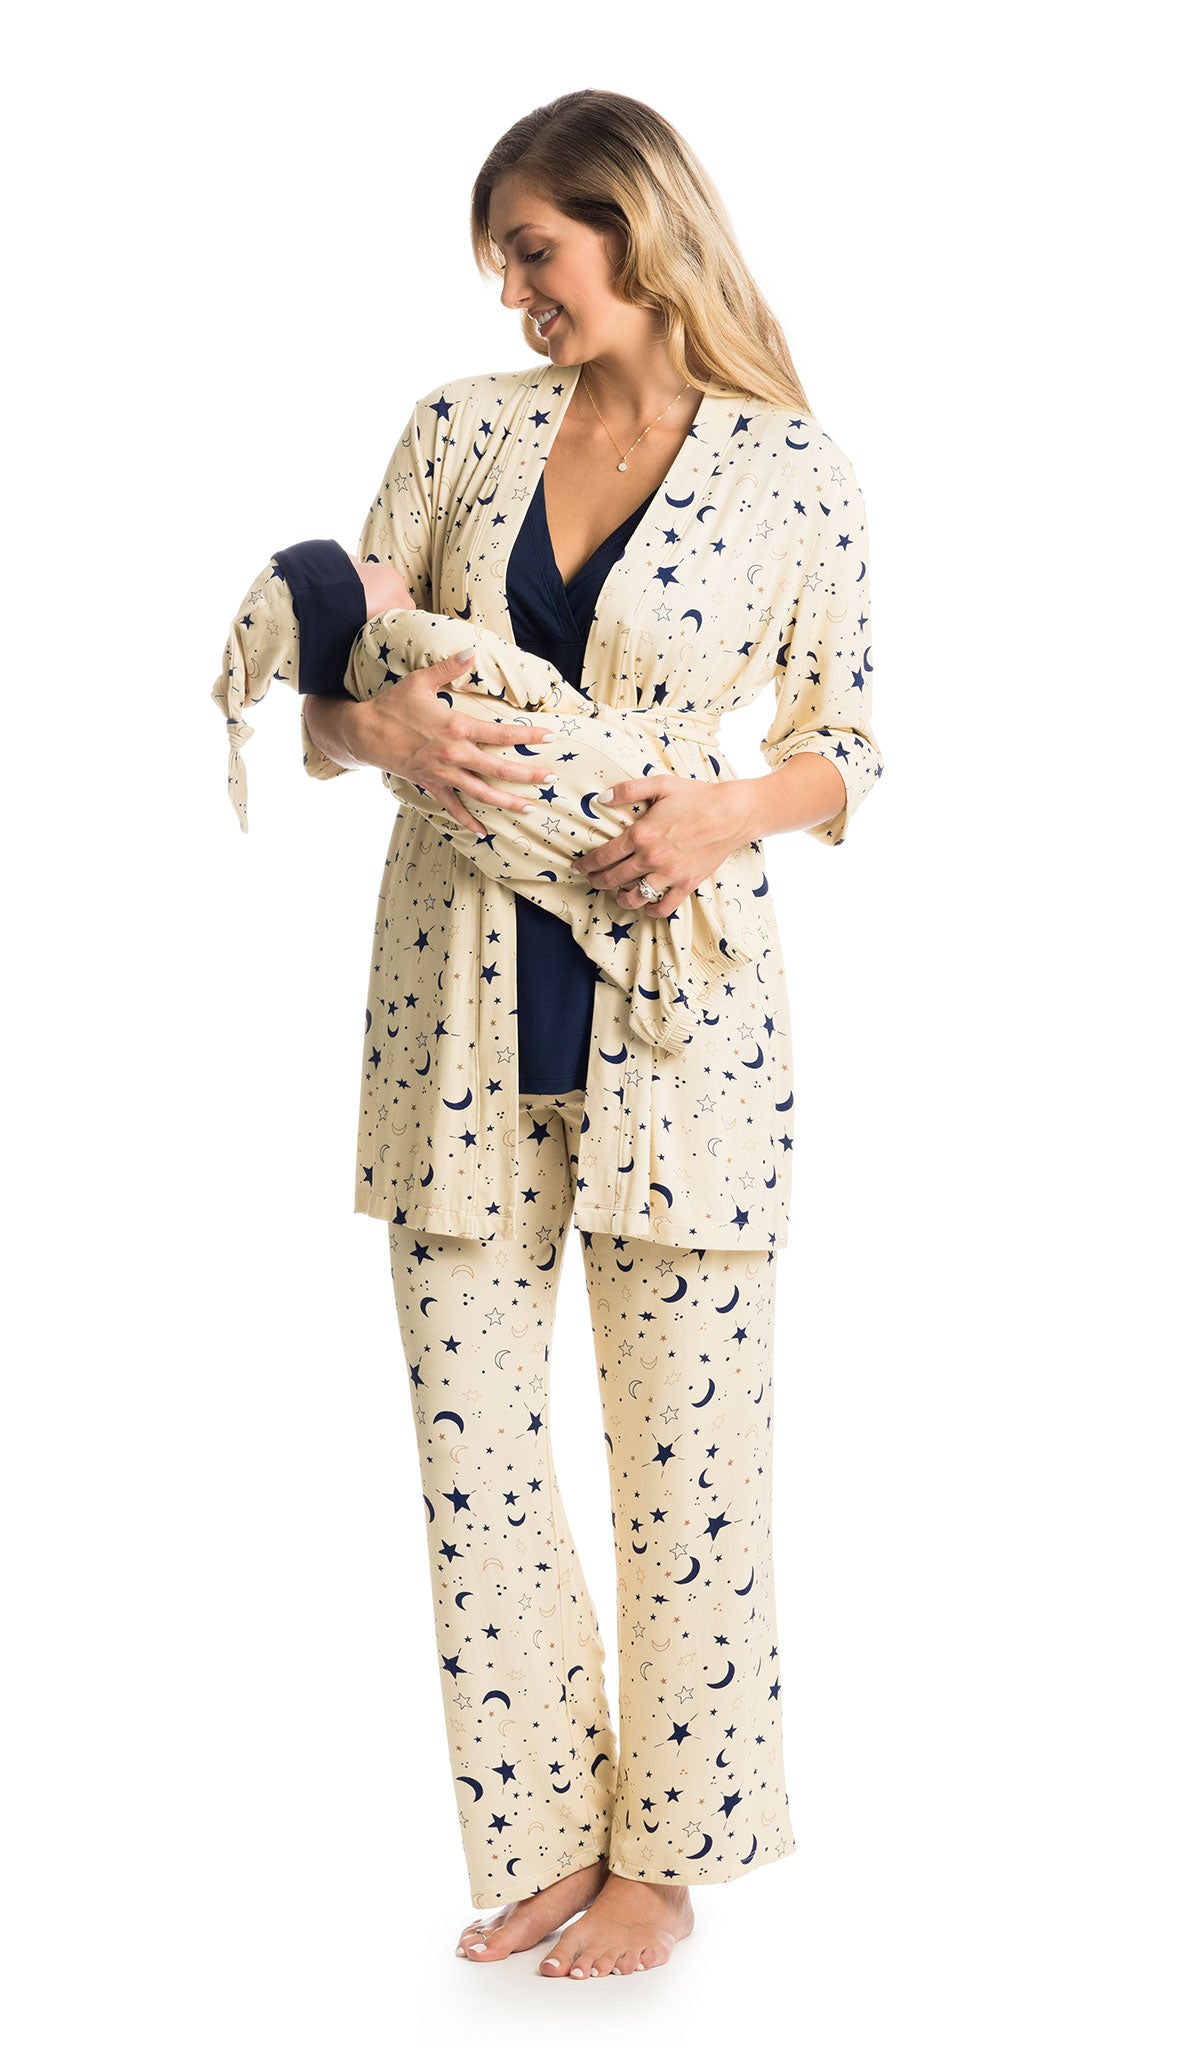 Twinkle Analise 5-Piece Set. Woman wearing 3/4 sleeve robe, tank top and pant while holding a baby wearing baby gown and knotted baby hat.